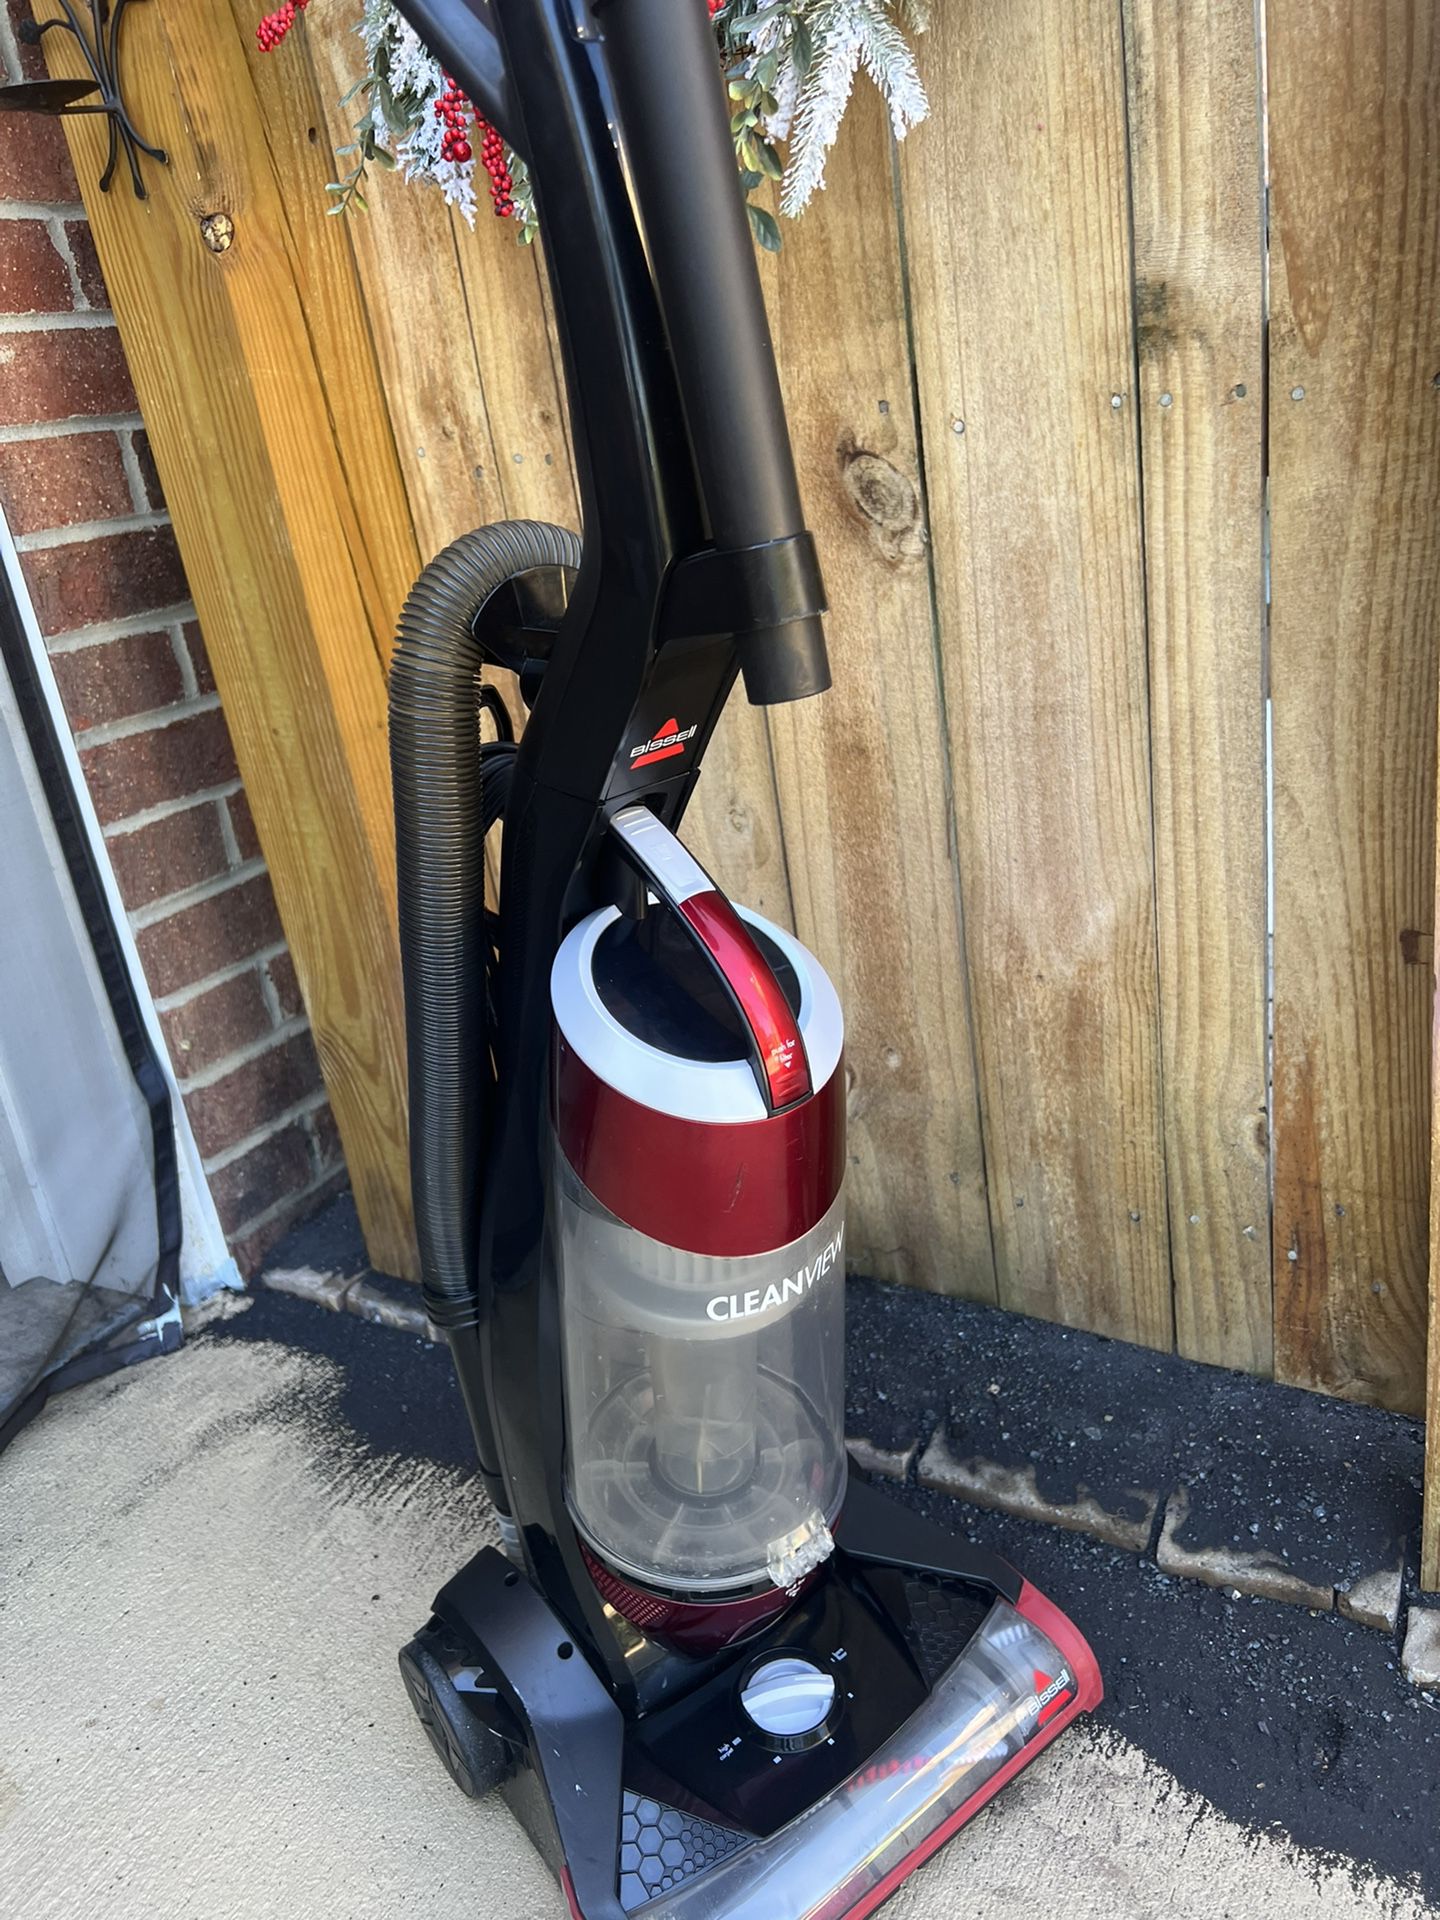  The BISSELL® CleanView® Vacuum a powerful, yet lightweight vacuum that picks up pet hair and debris across the various types of surfaces in your home